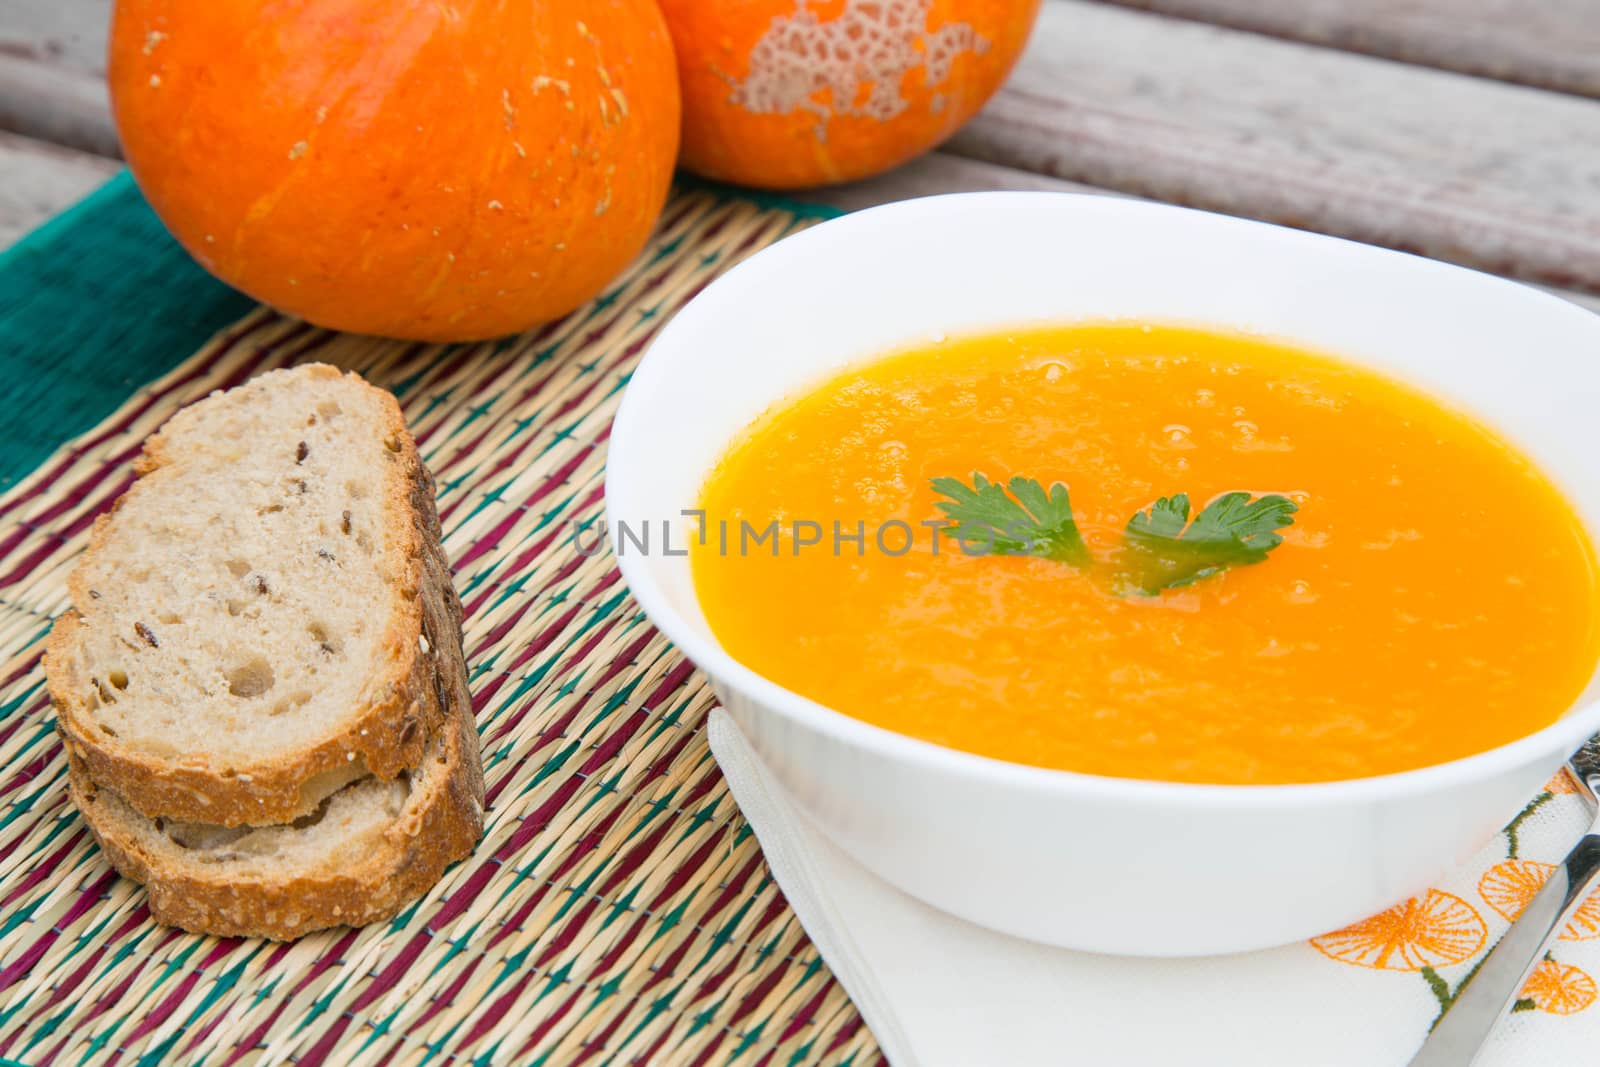 Pumpkin cream soup by tolikoff_photography